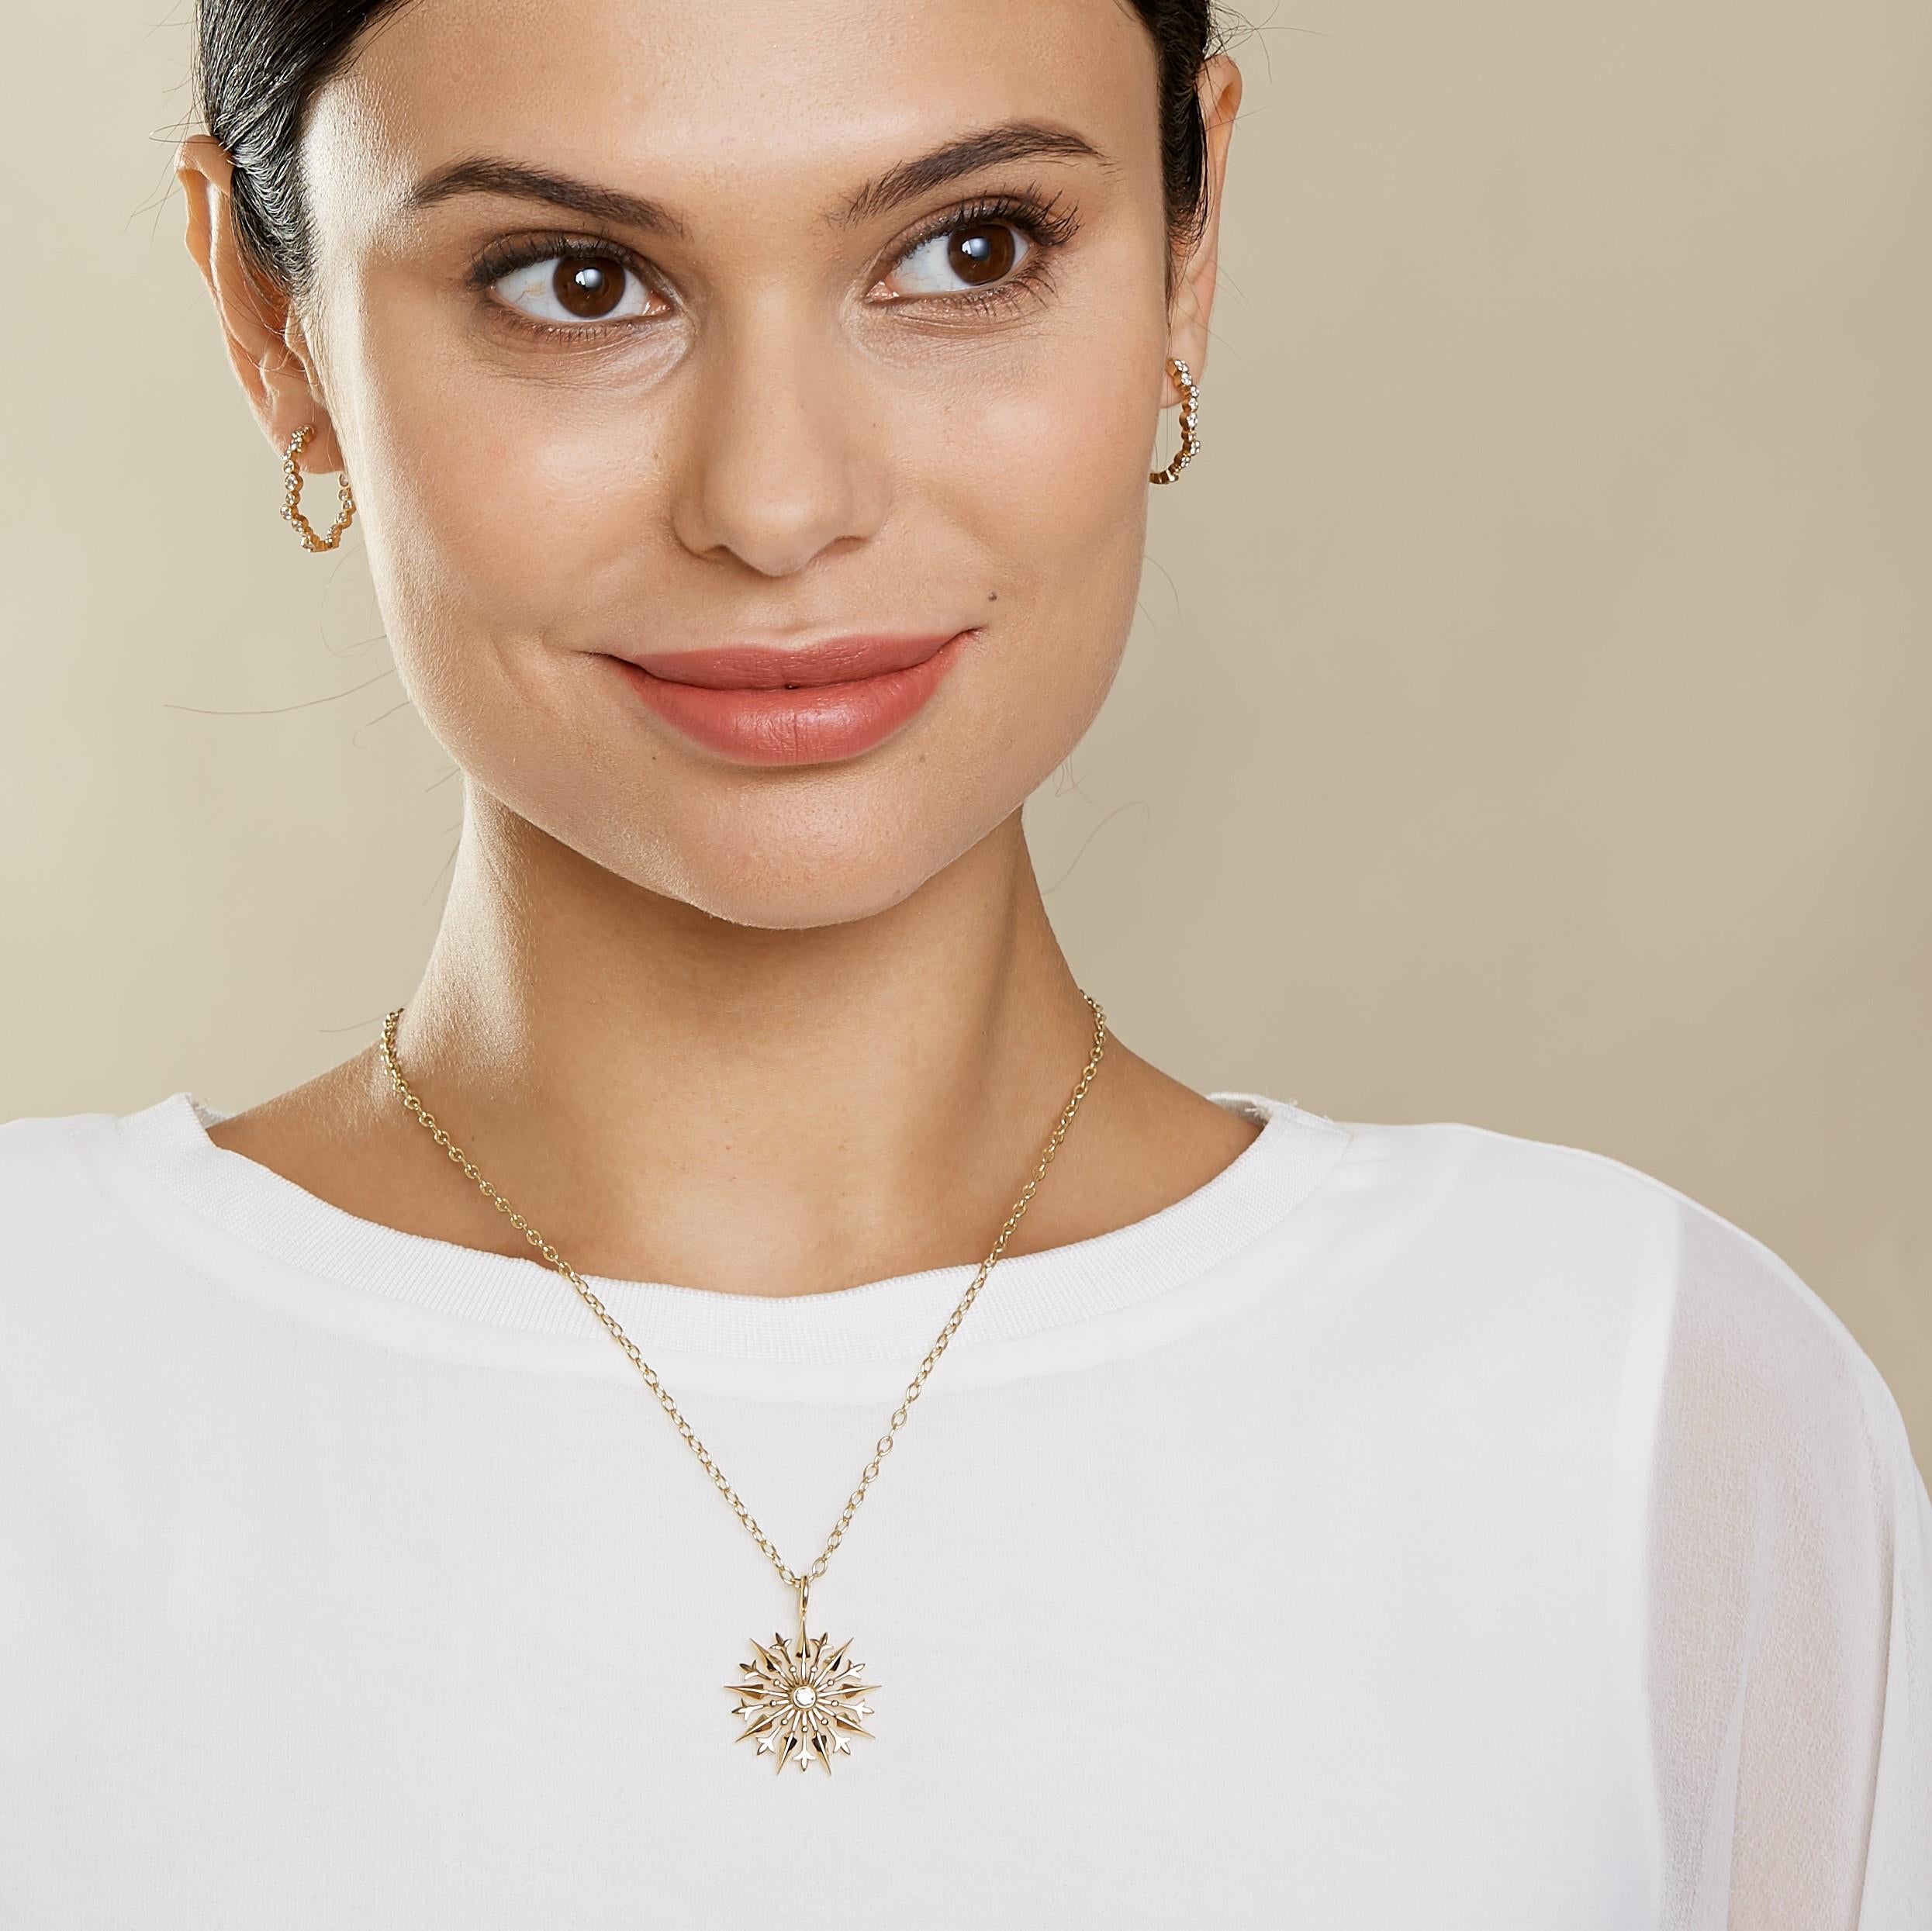 Created in 18kyg
Diamond 0.15 cts approx
Limited edition
Chain sold separately

Exquisitely crafted in 18 karat yellow gold, this limited edition pendant features an exquisite 0.15 carat diamond; a captivating chain, sold separately, completes the